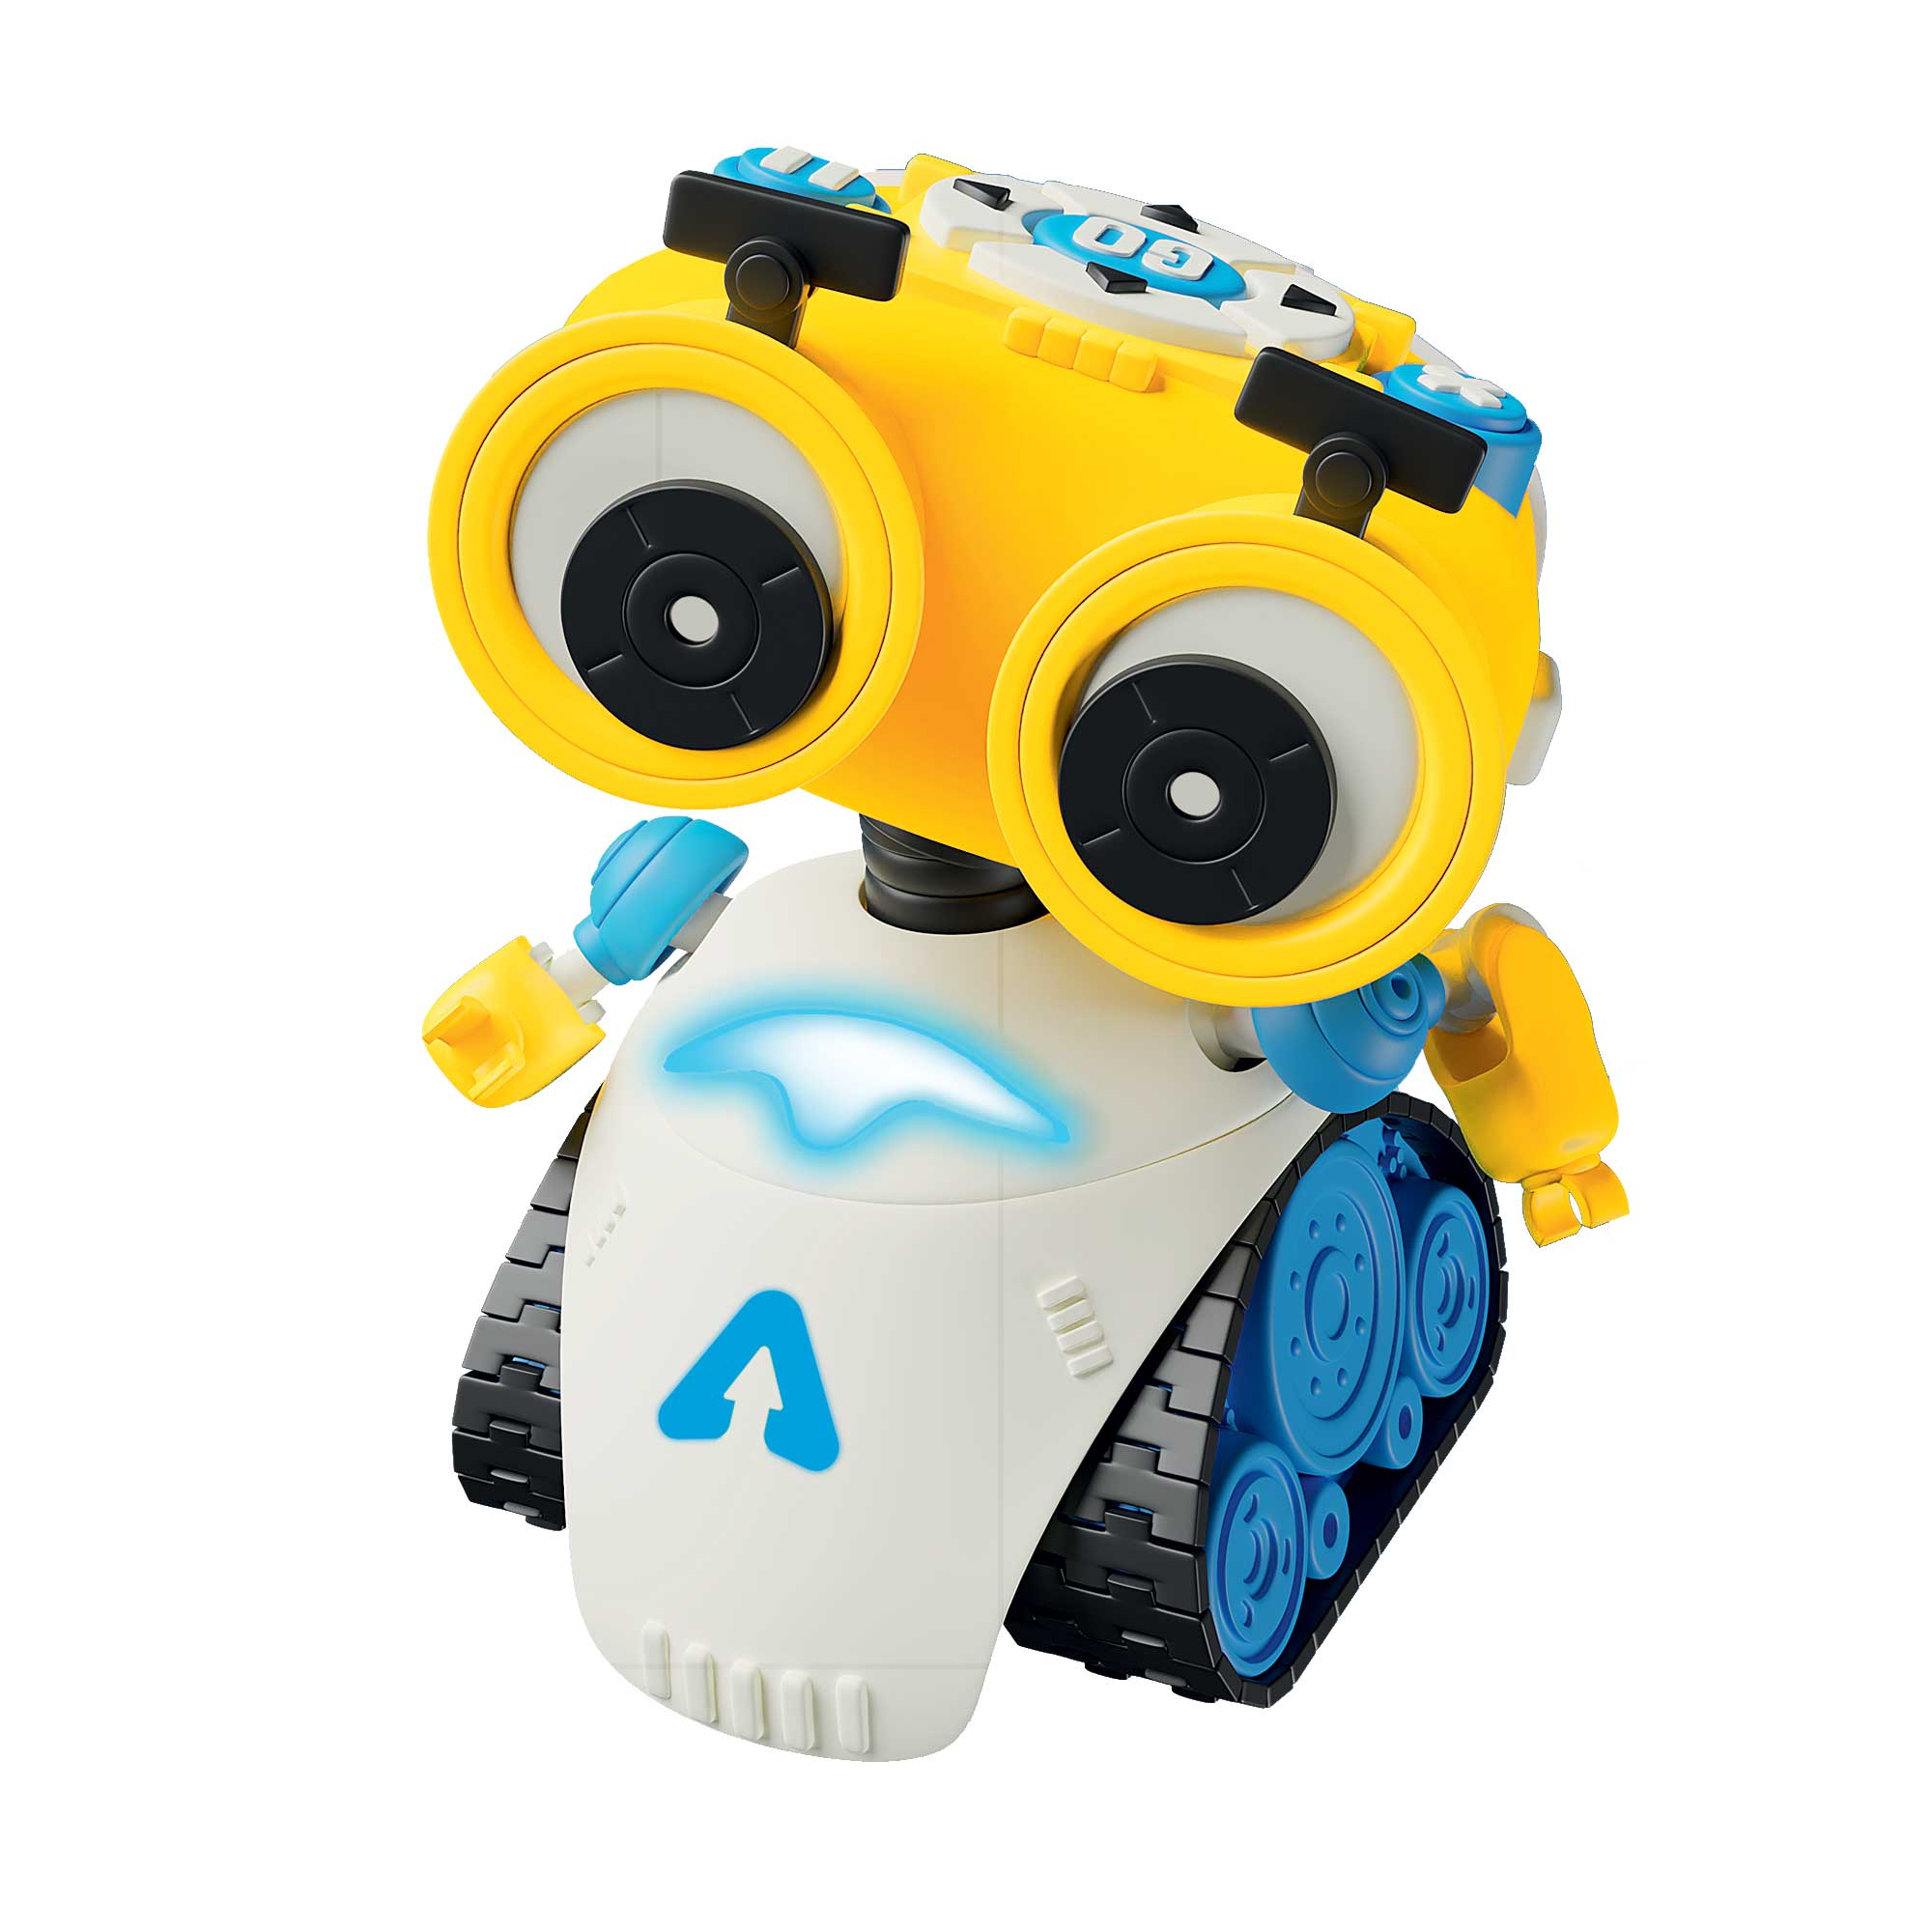 Andy The Code & Play Robot    